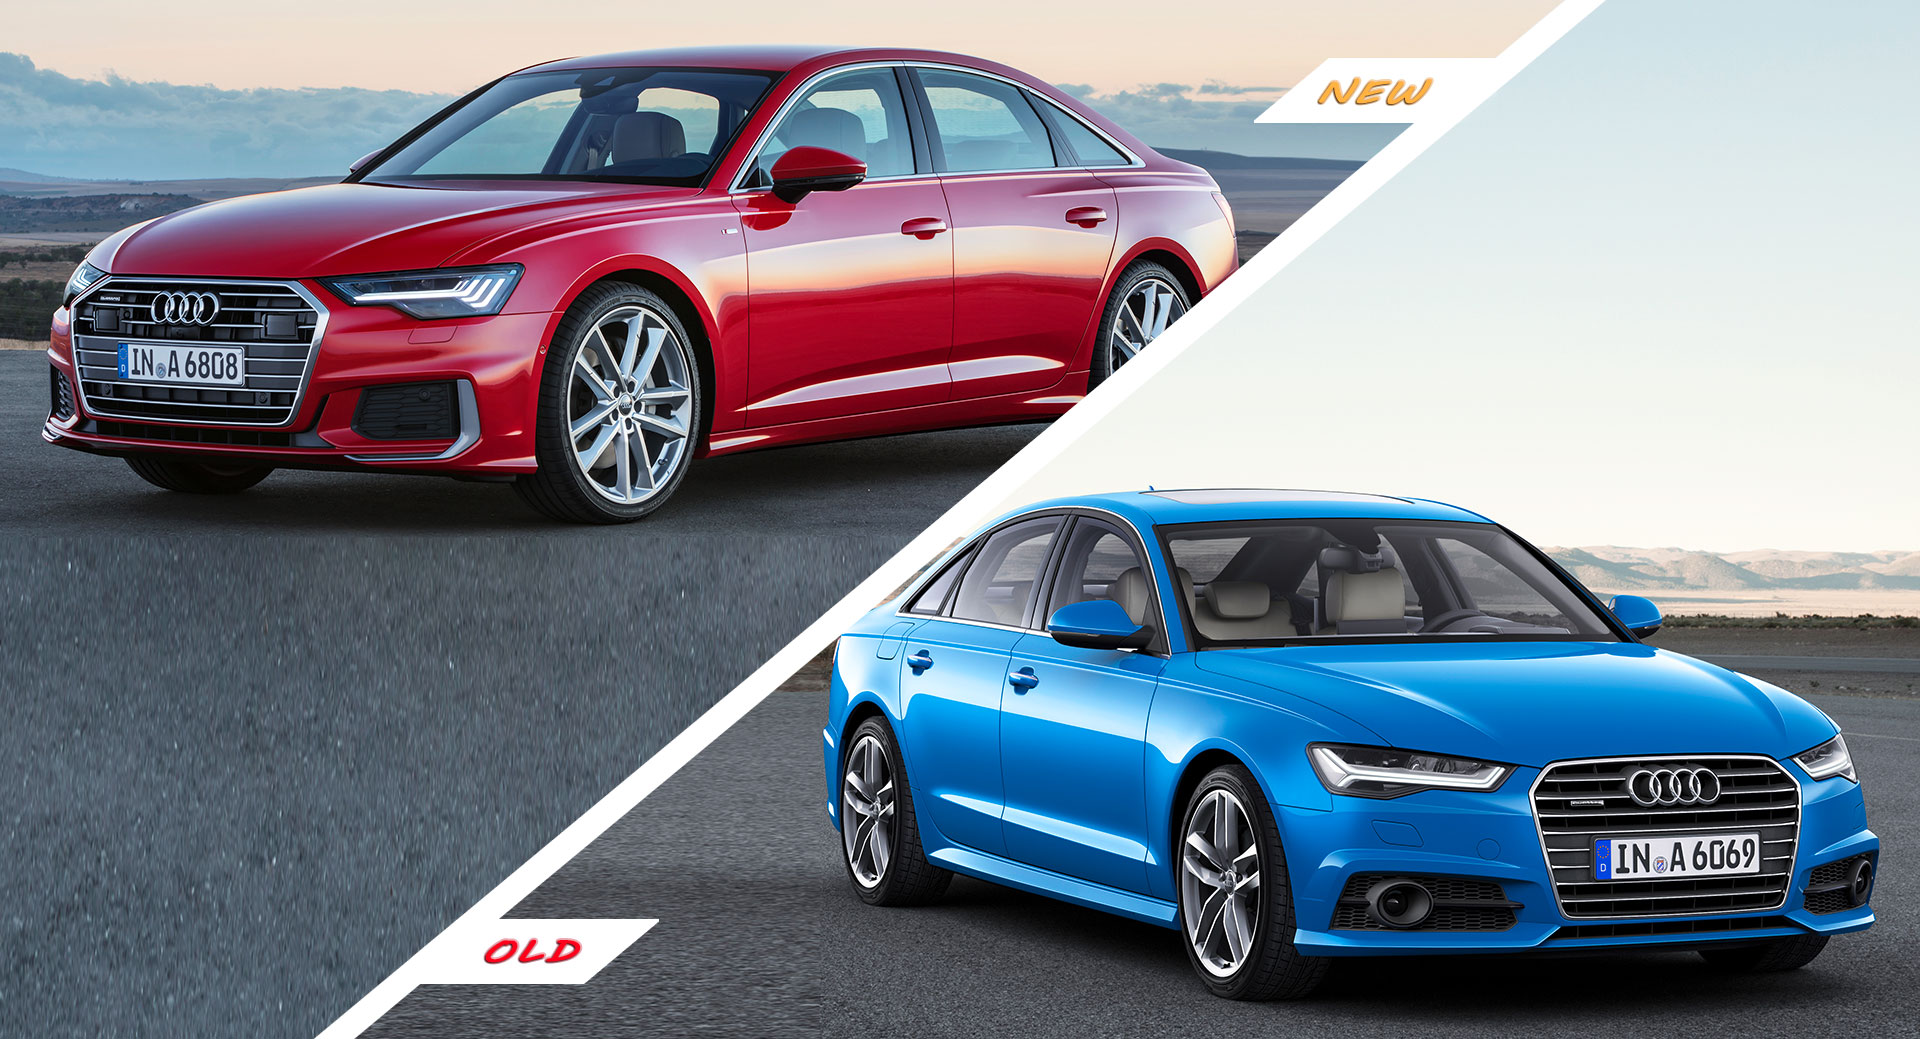 We Visually Compare The 2019 Audi A6 Against Its Predecessor